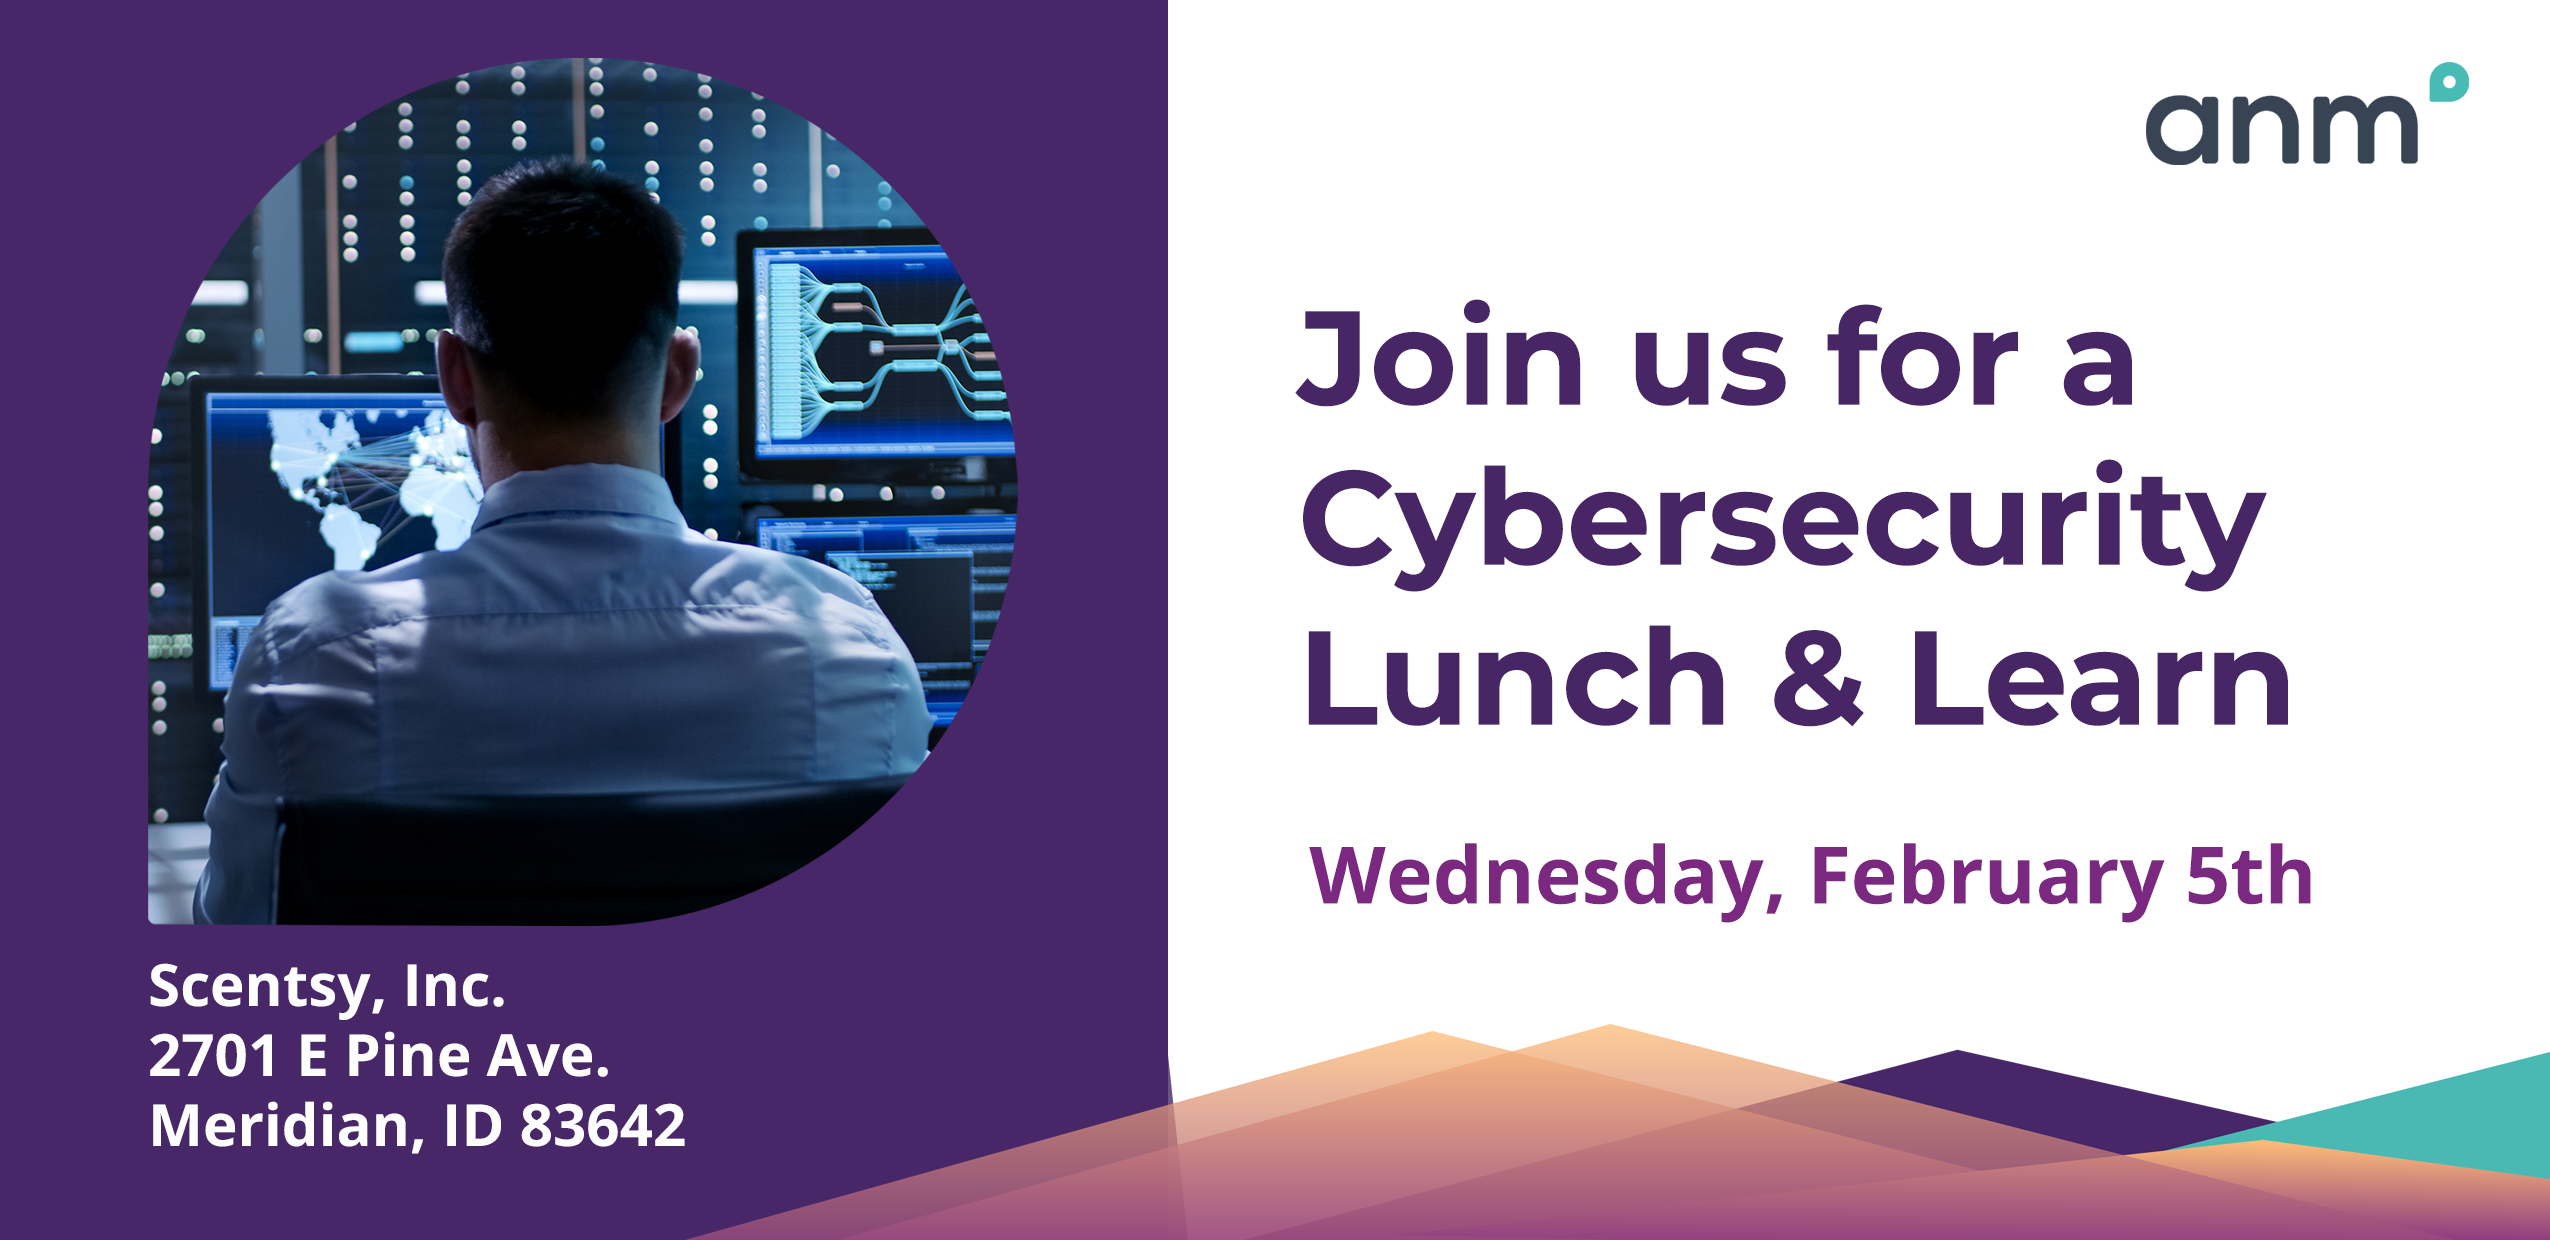 ANM Cybersecurity Lunch & Learn